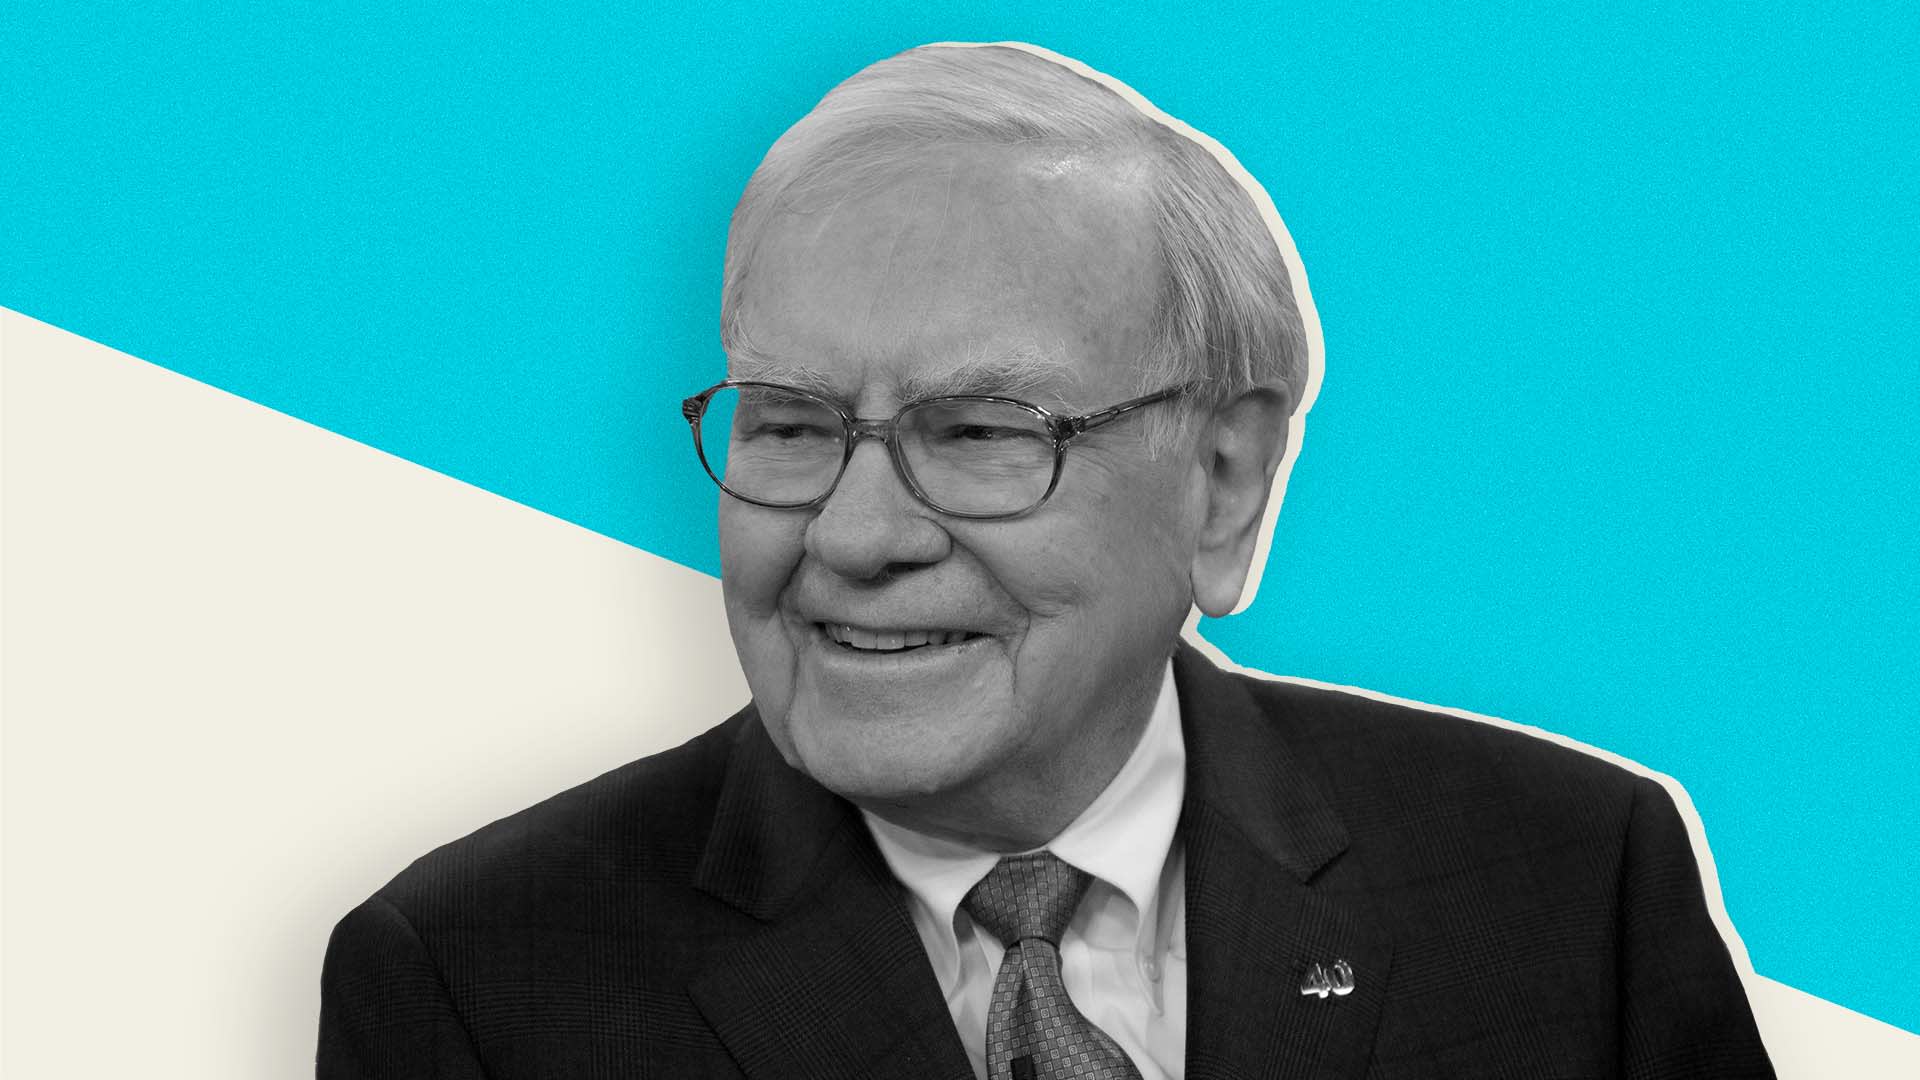 1 Thing Warren Buffett Says You Should Do to Be Happy and Successful